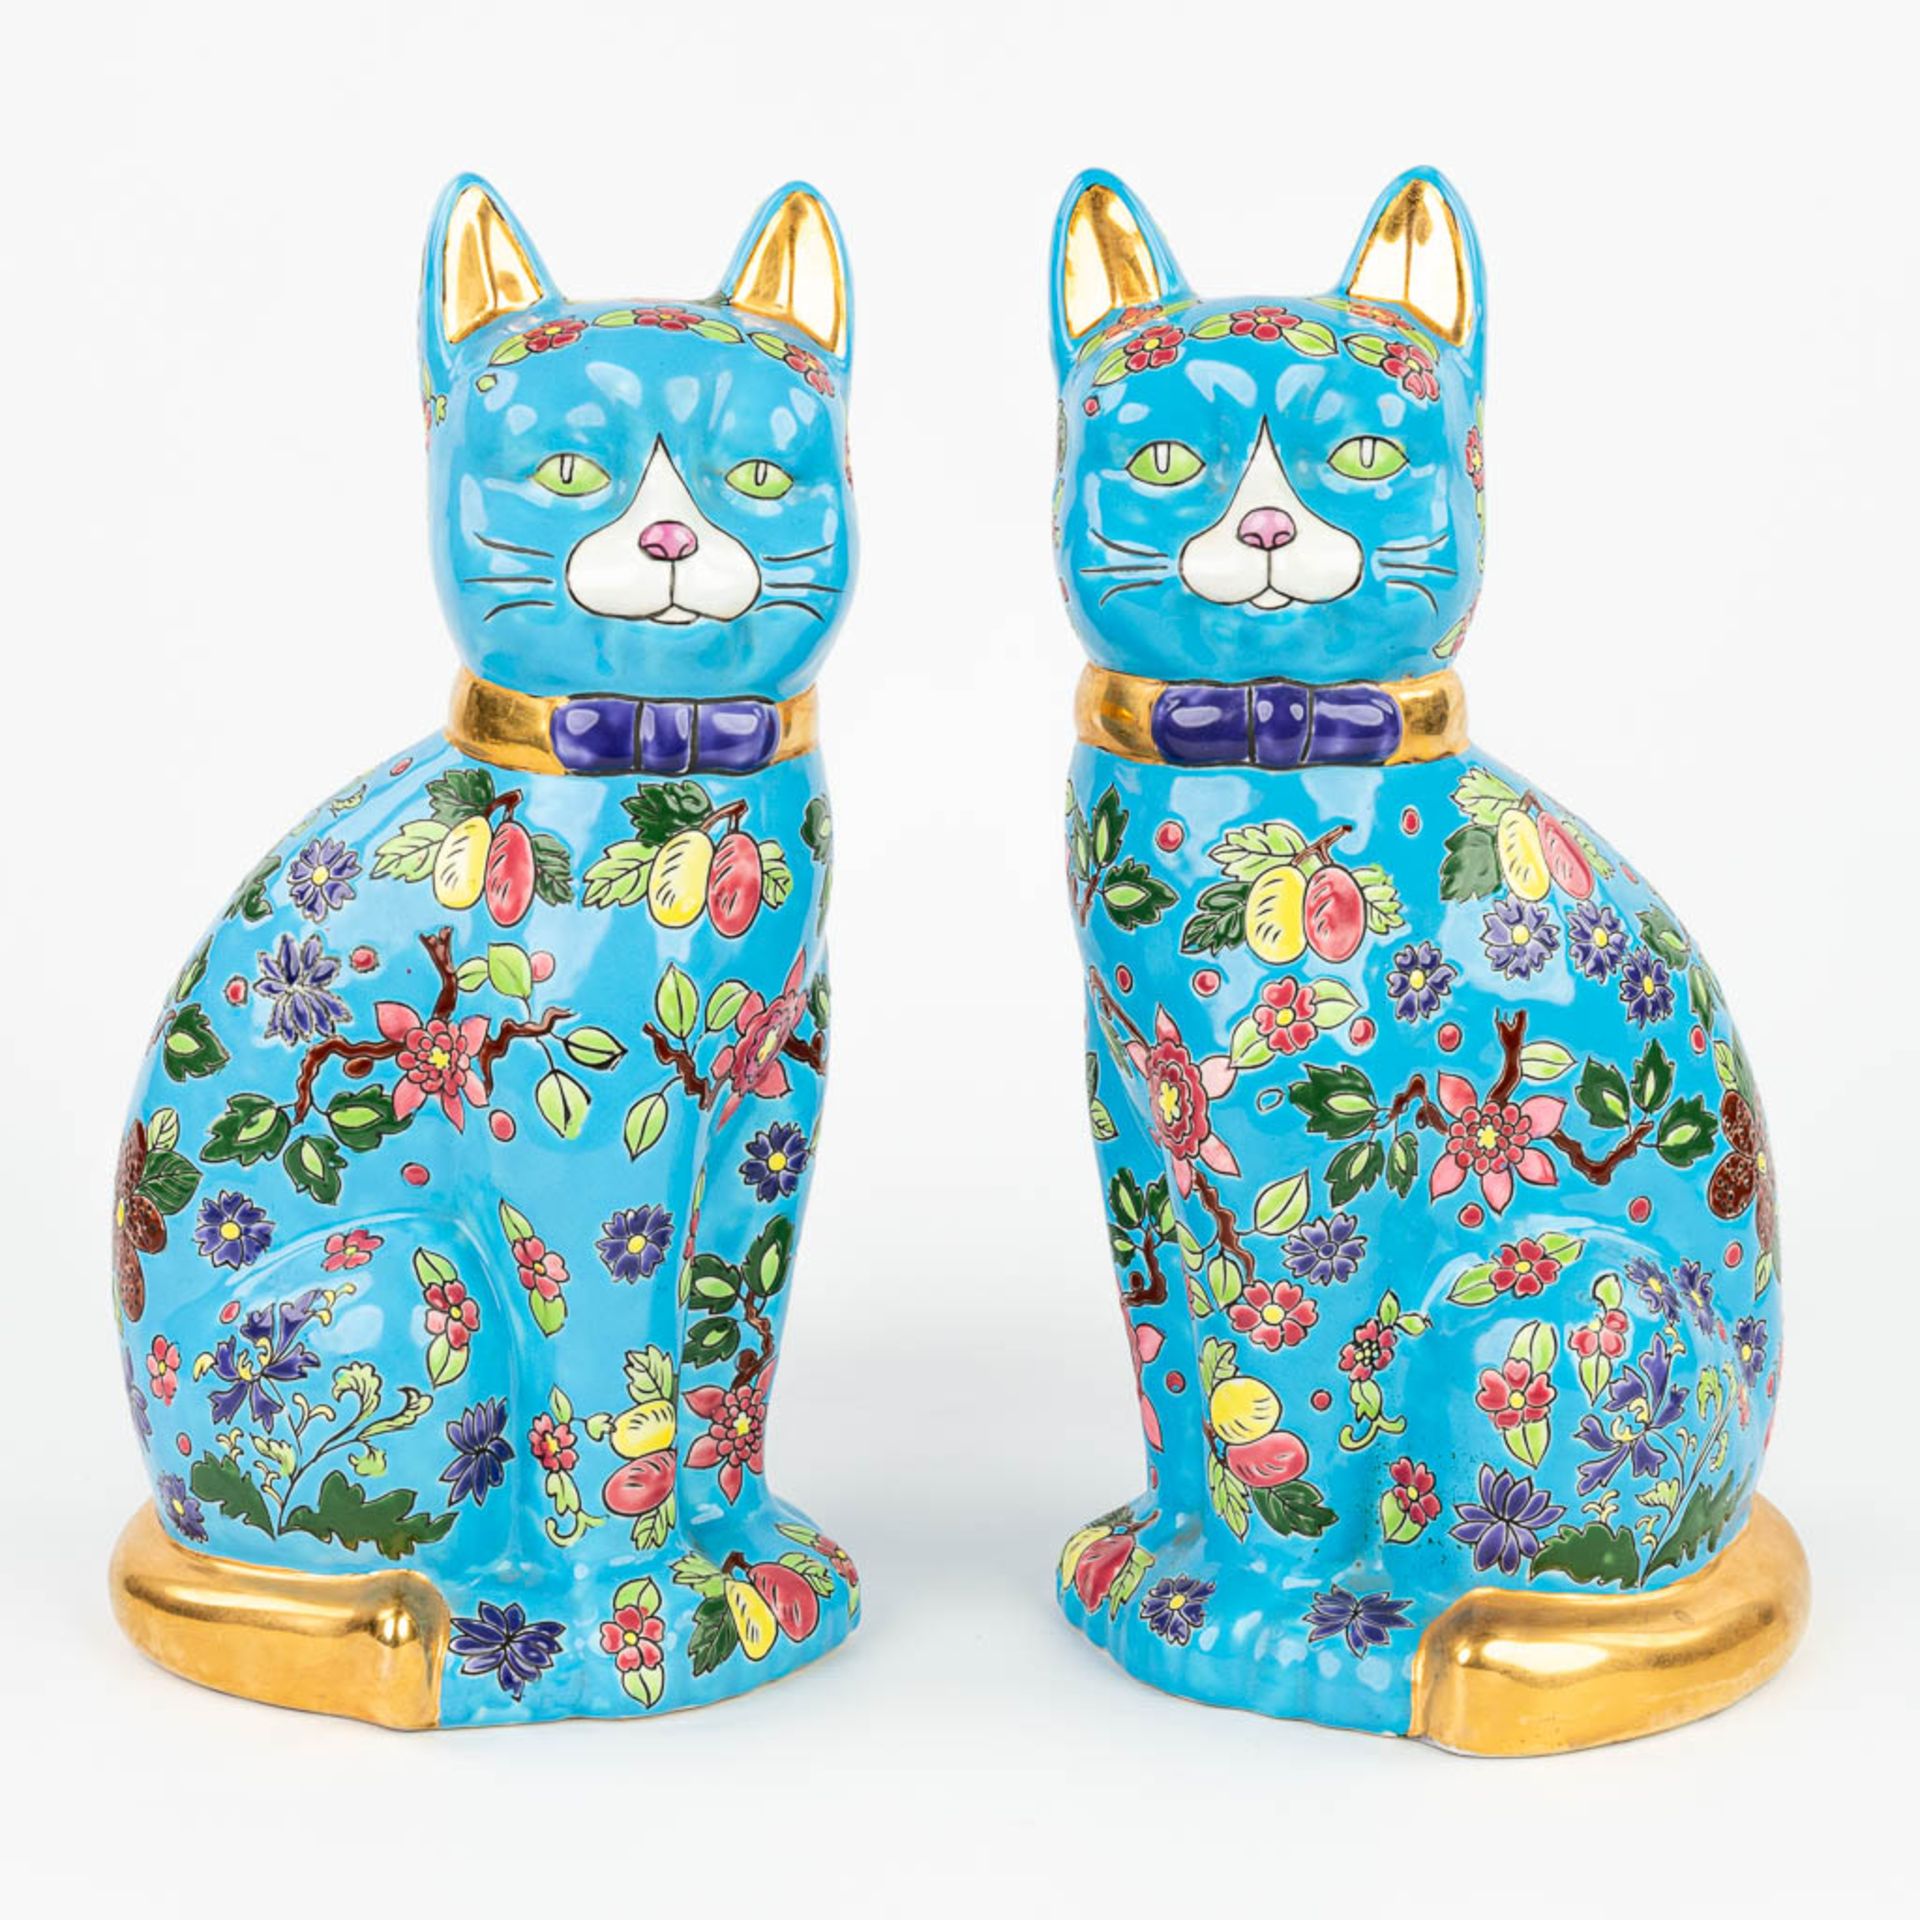 A pair of decorative cats made of glazed faience in the style of 'Emaux de Longwy'. (L:15 x W:18 x H